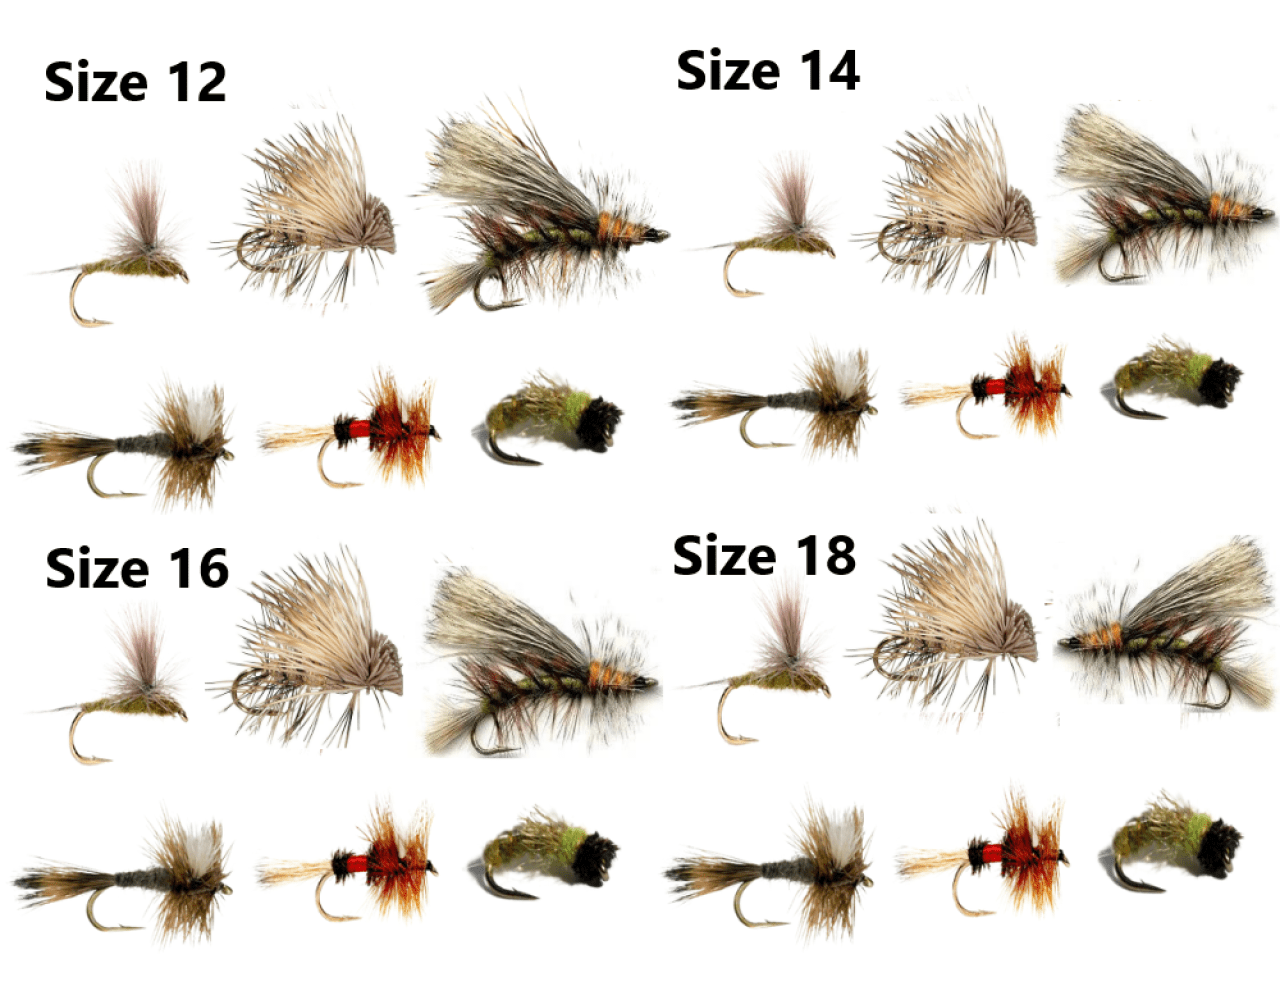 24 Dry Fly Trout Assortment, Adams Wulff, Royal Wulff, Elk Caddis, Blue  Wing, Z Caddis Larva, Stimulator, a Great Fly Fishing Assortment for Trout.  